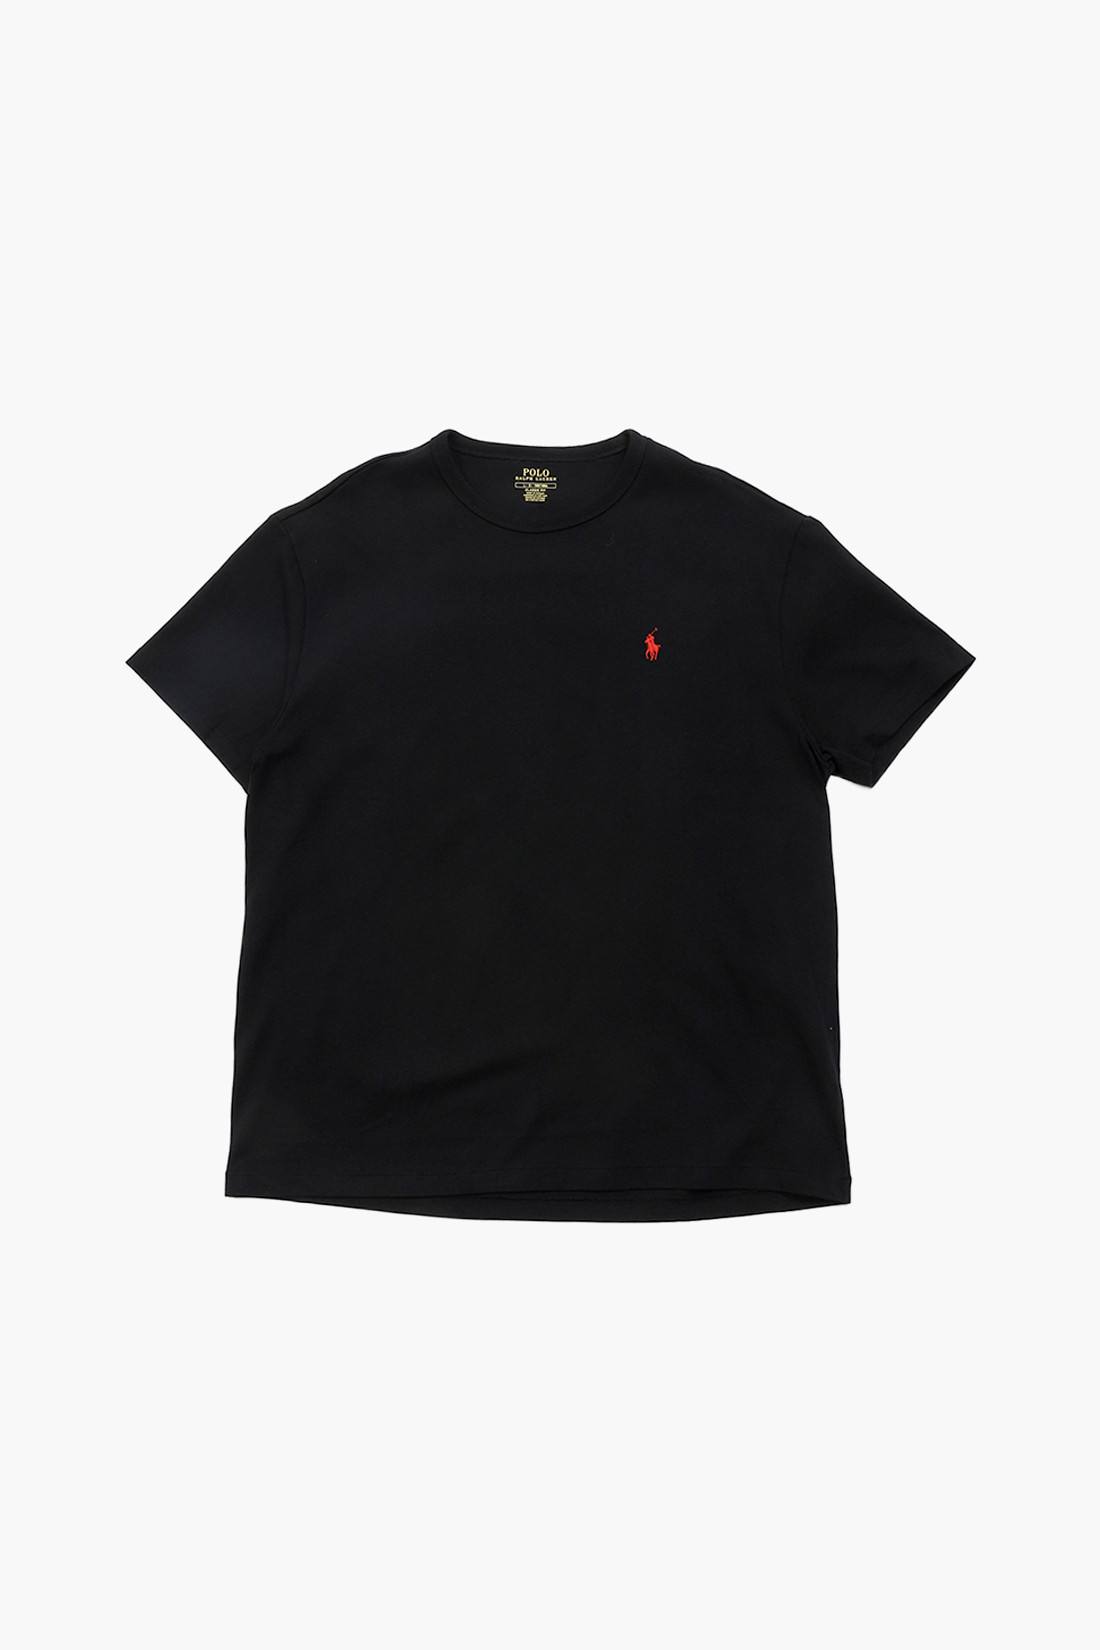 Classic fit s/s tee Black